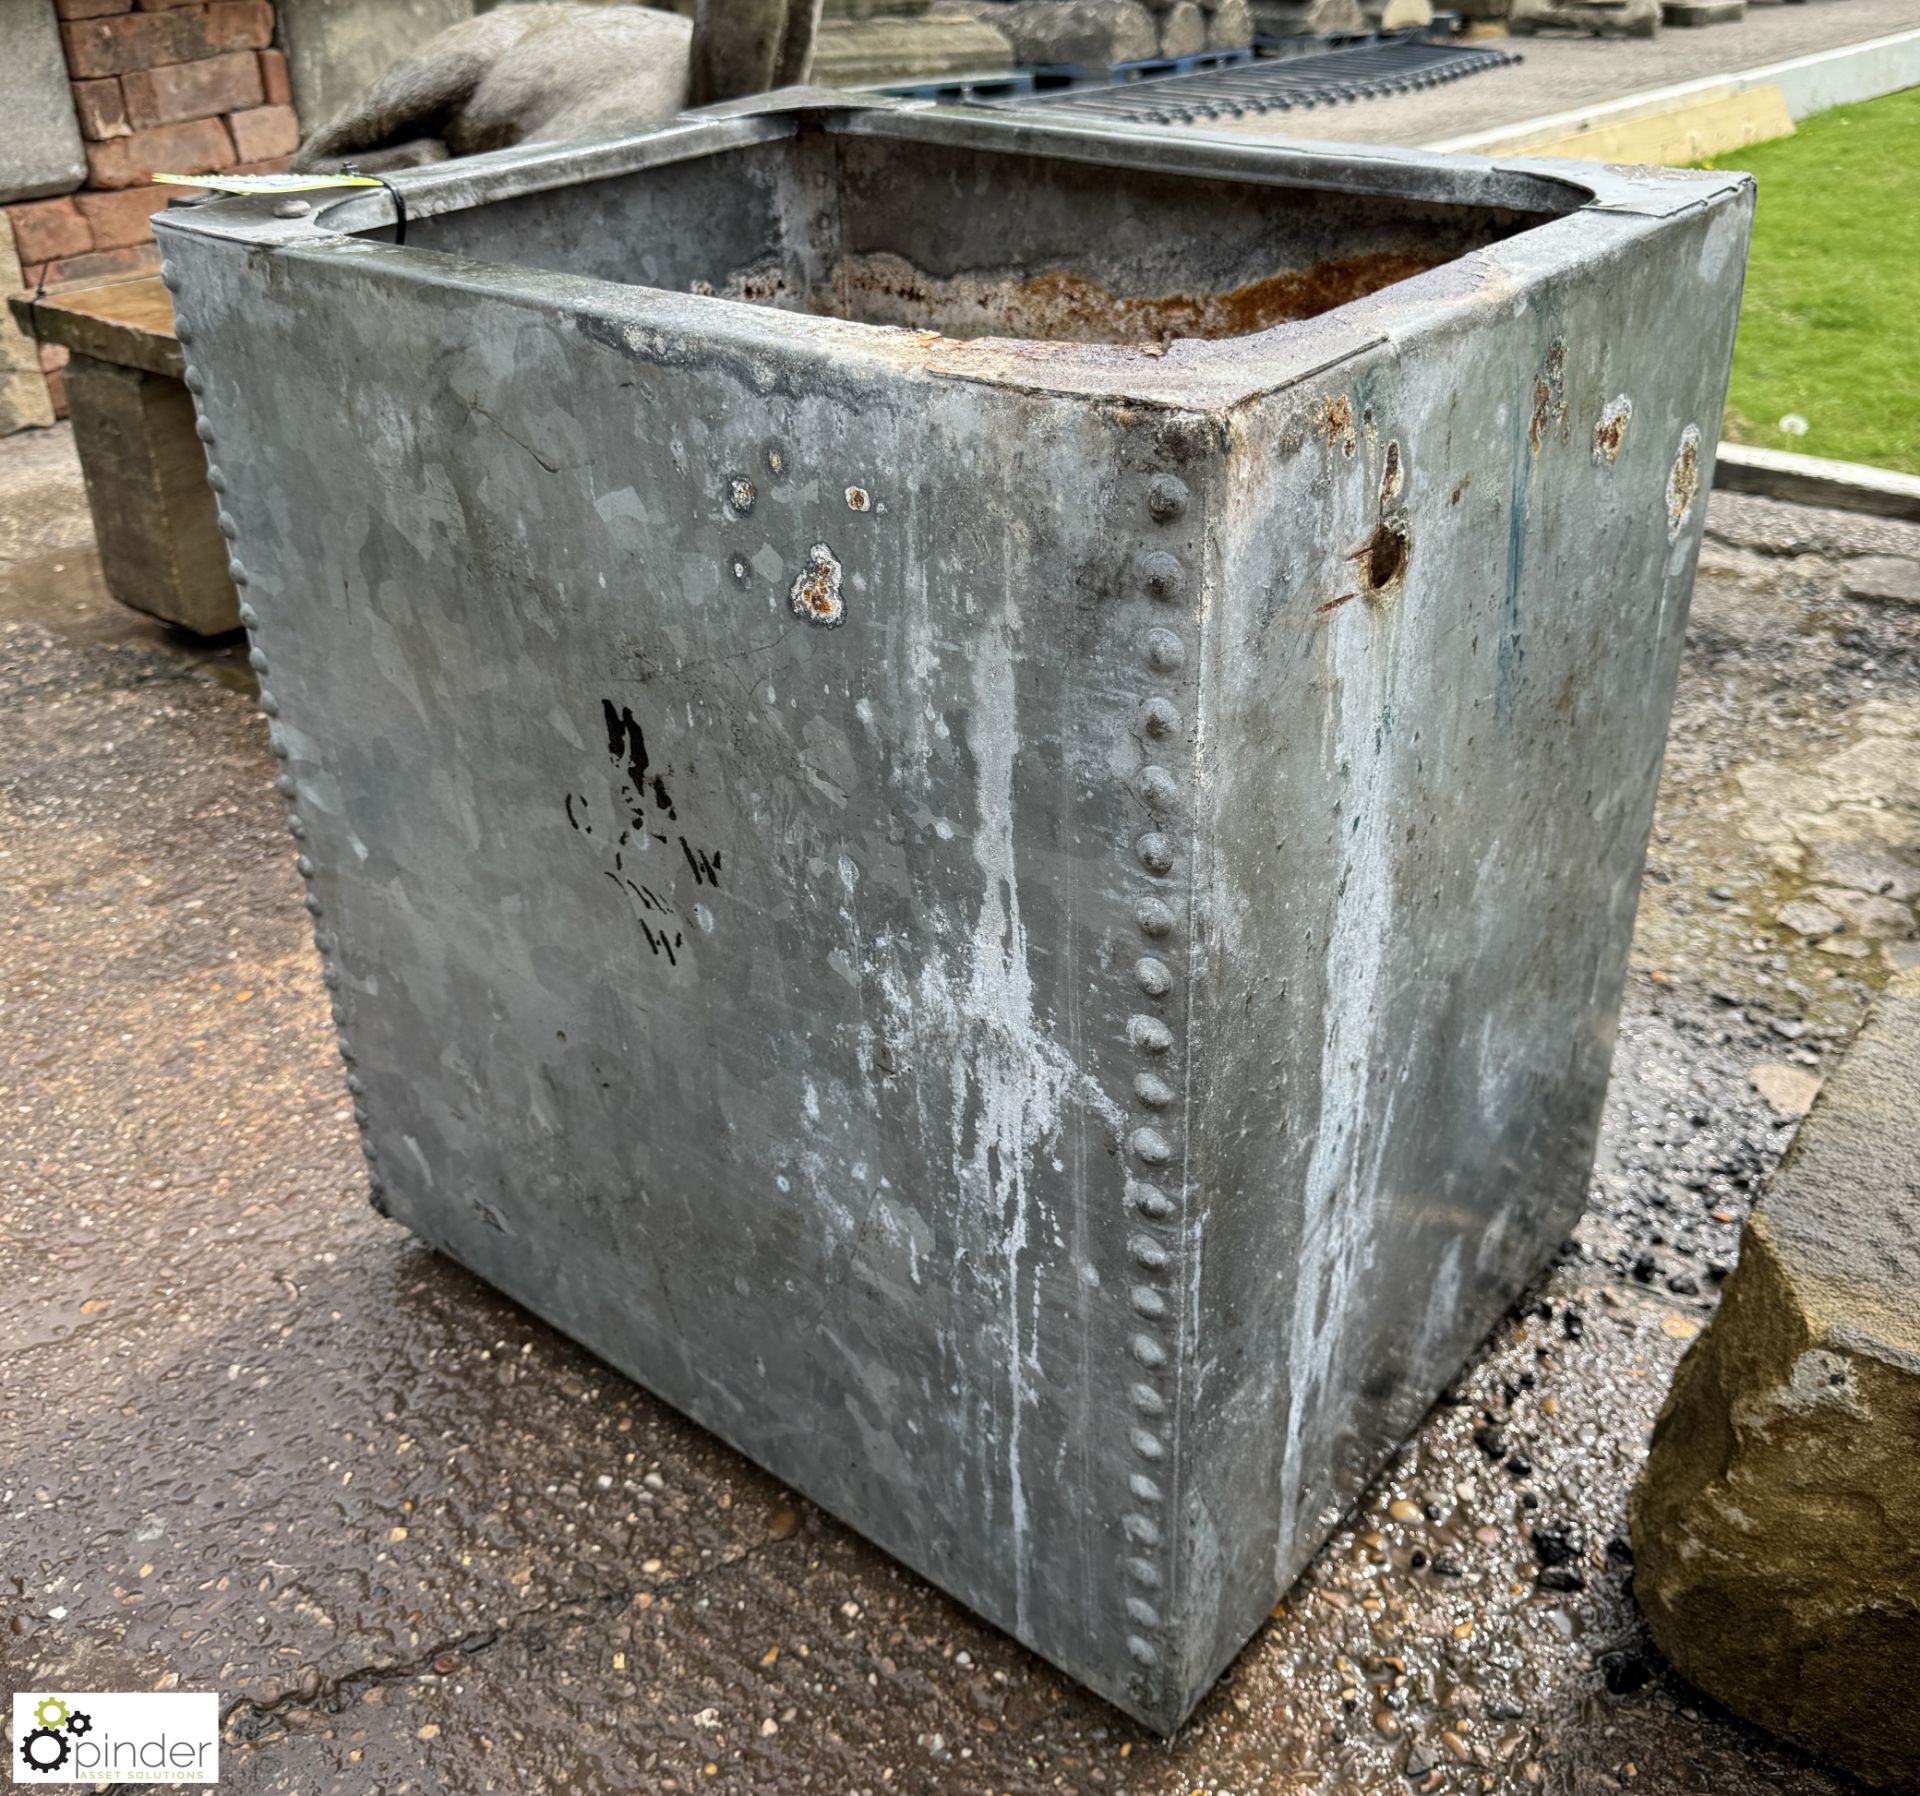 A metal galvanised riveted Water Cistern, approx. 24in x 24in x 18in, circa 1920 to 1940s - Image 2 of 6